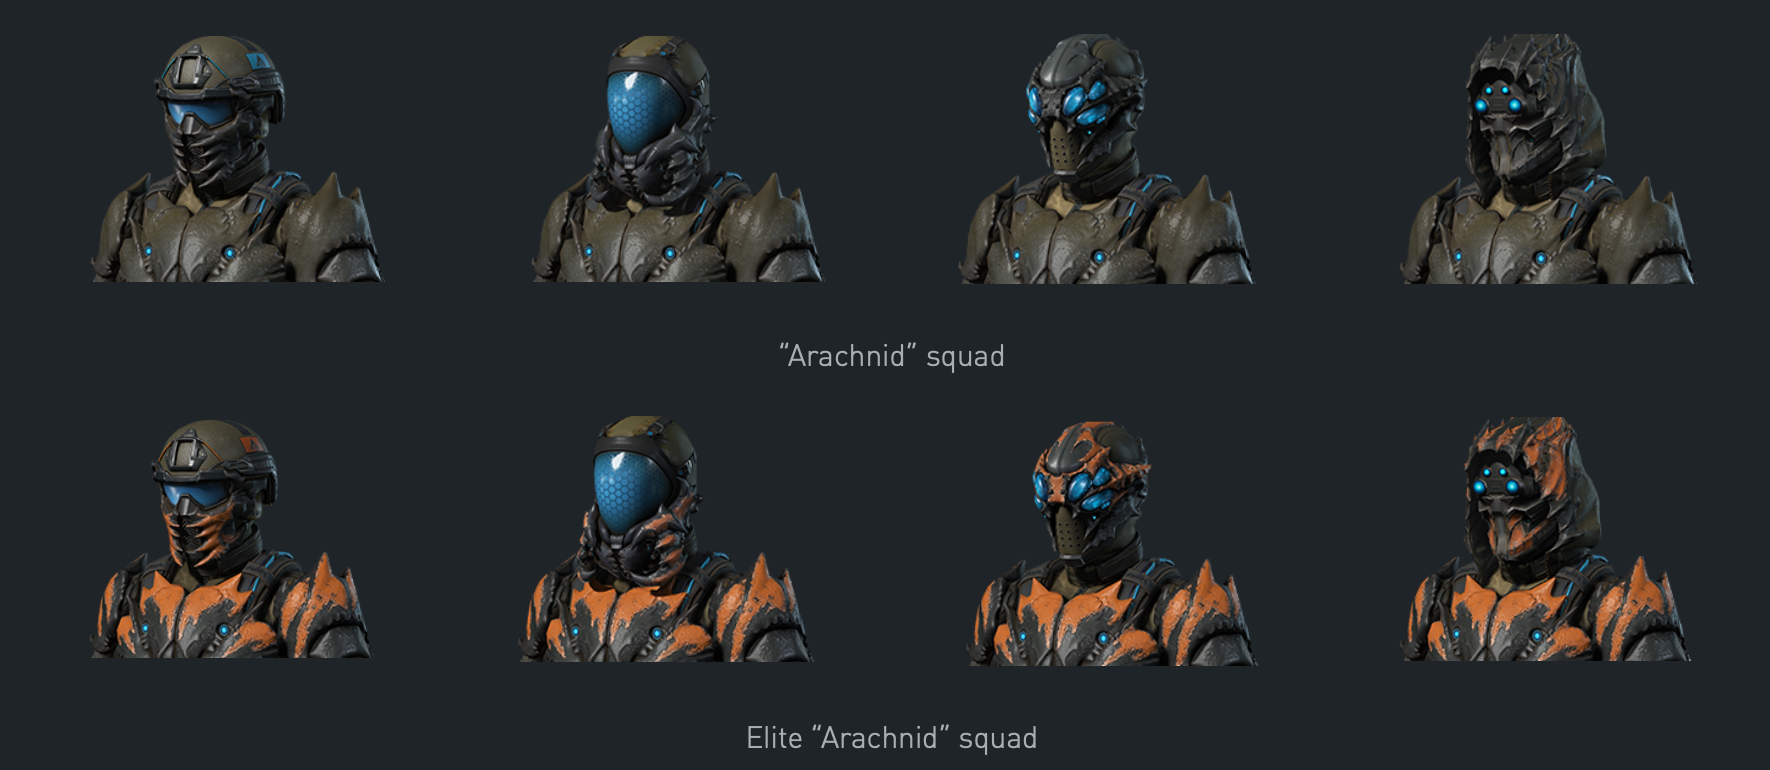 As for Elite "Arachnid" squad appearances, they are waiting for p...